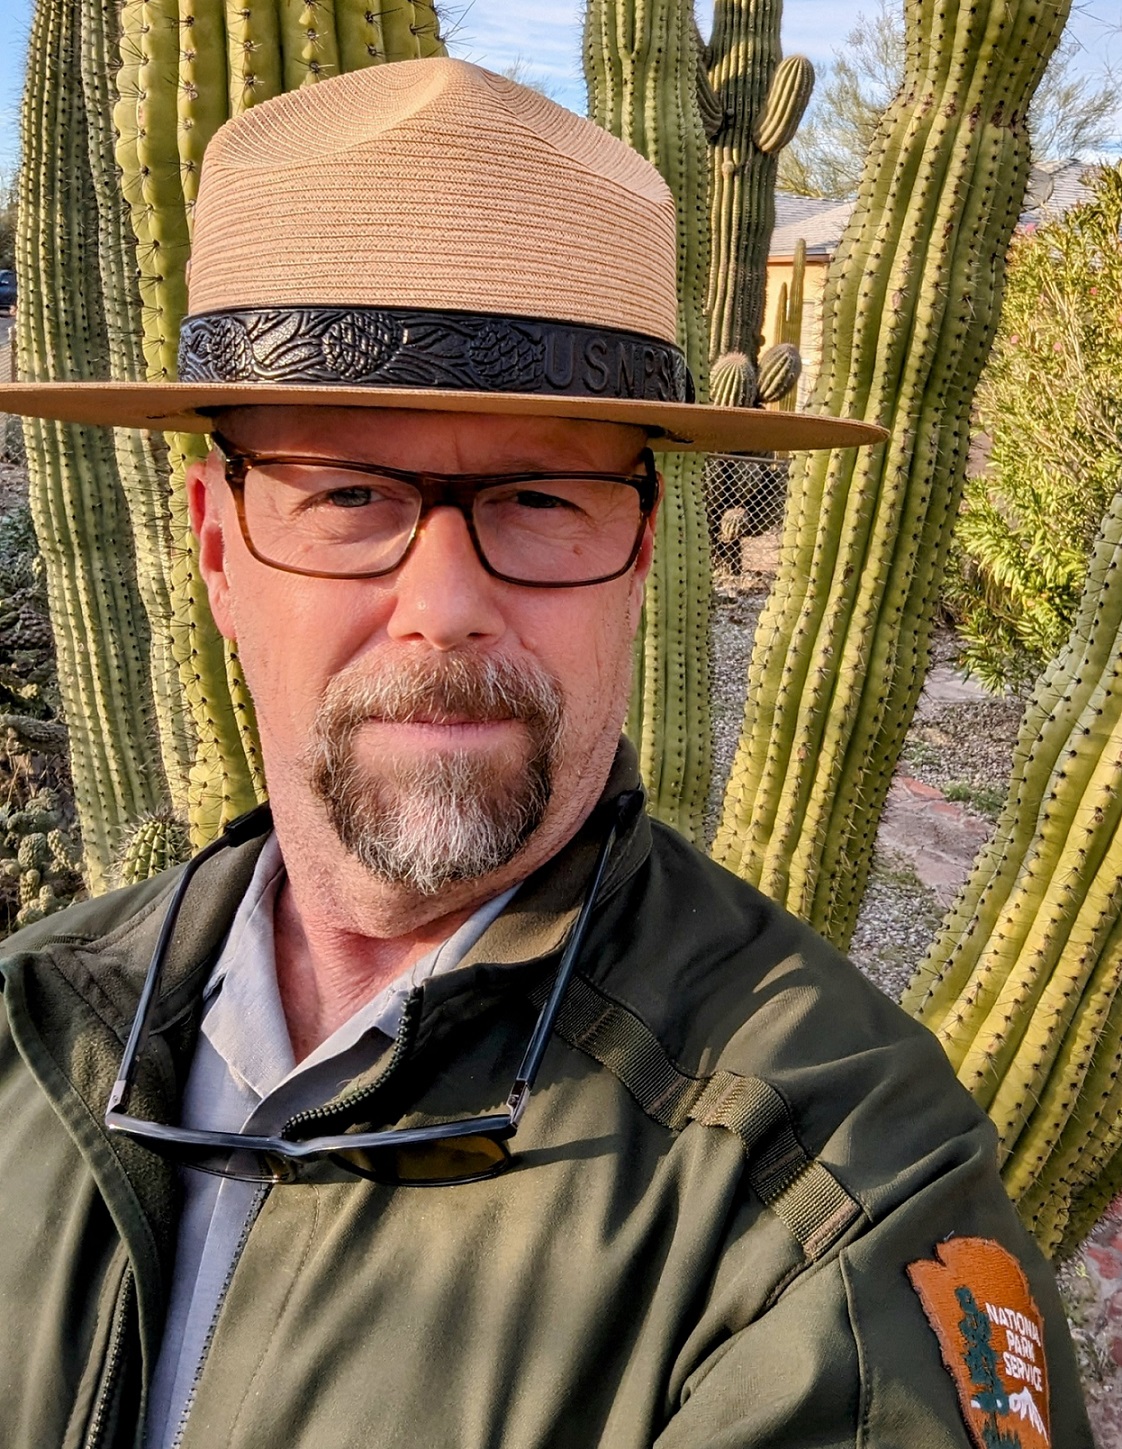 Man in National Park Service uniform in front of a large cactus